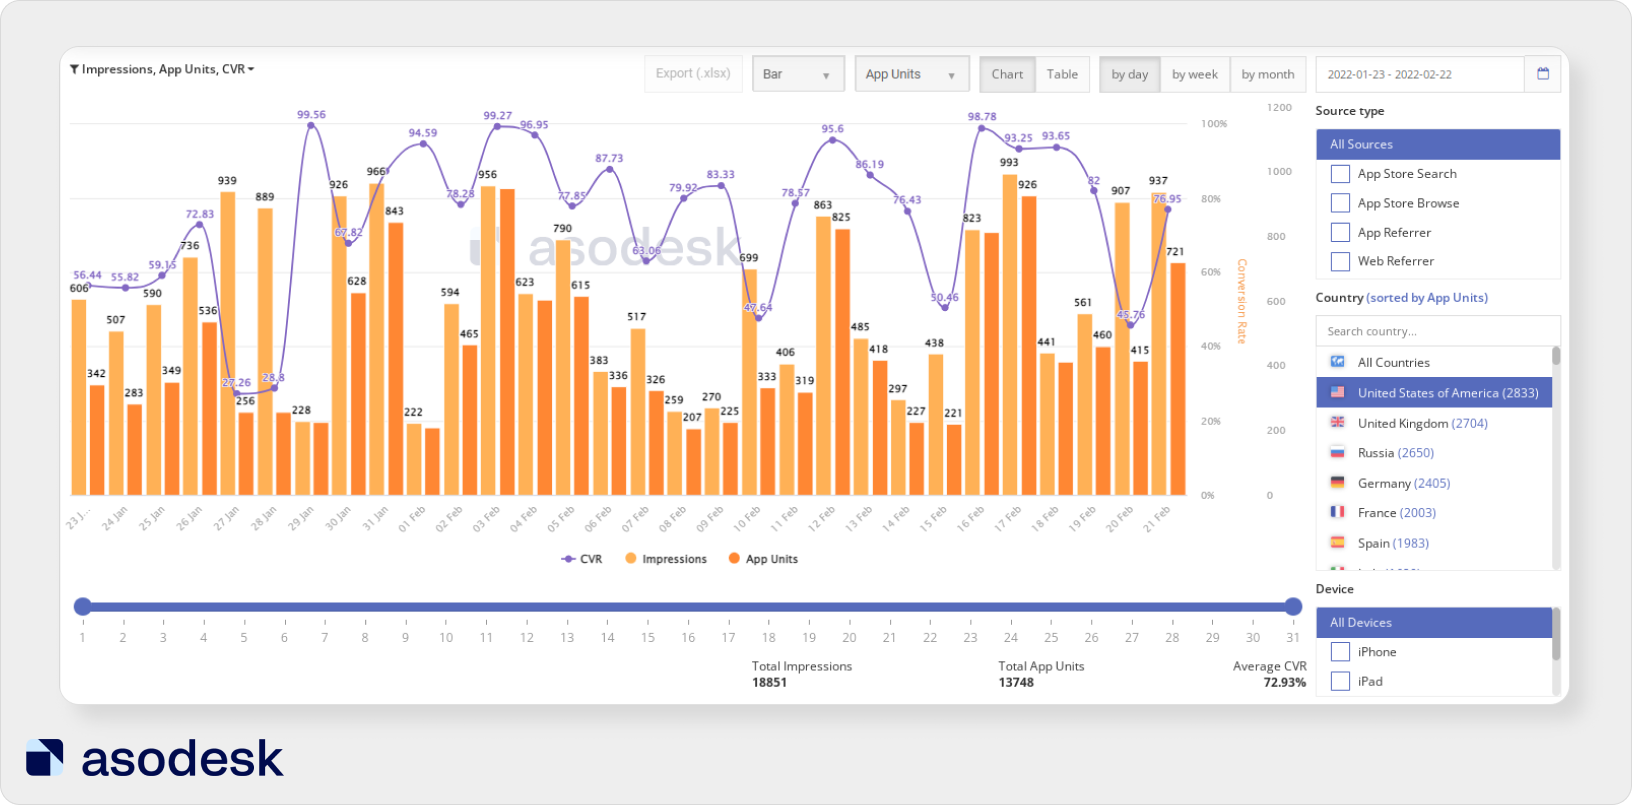 With ASO Dashboard you can see the ratio of App Units, Downloads, Impressions and Product Page Views for any period